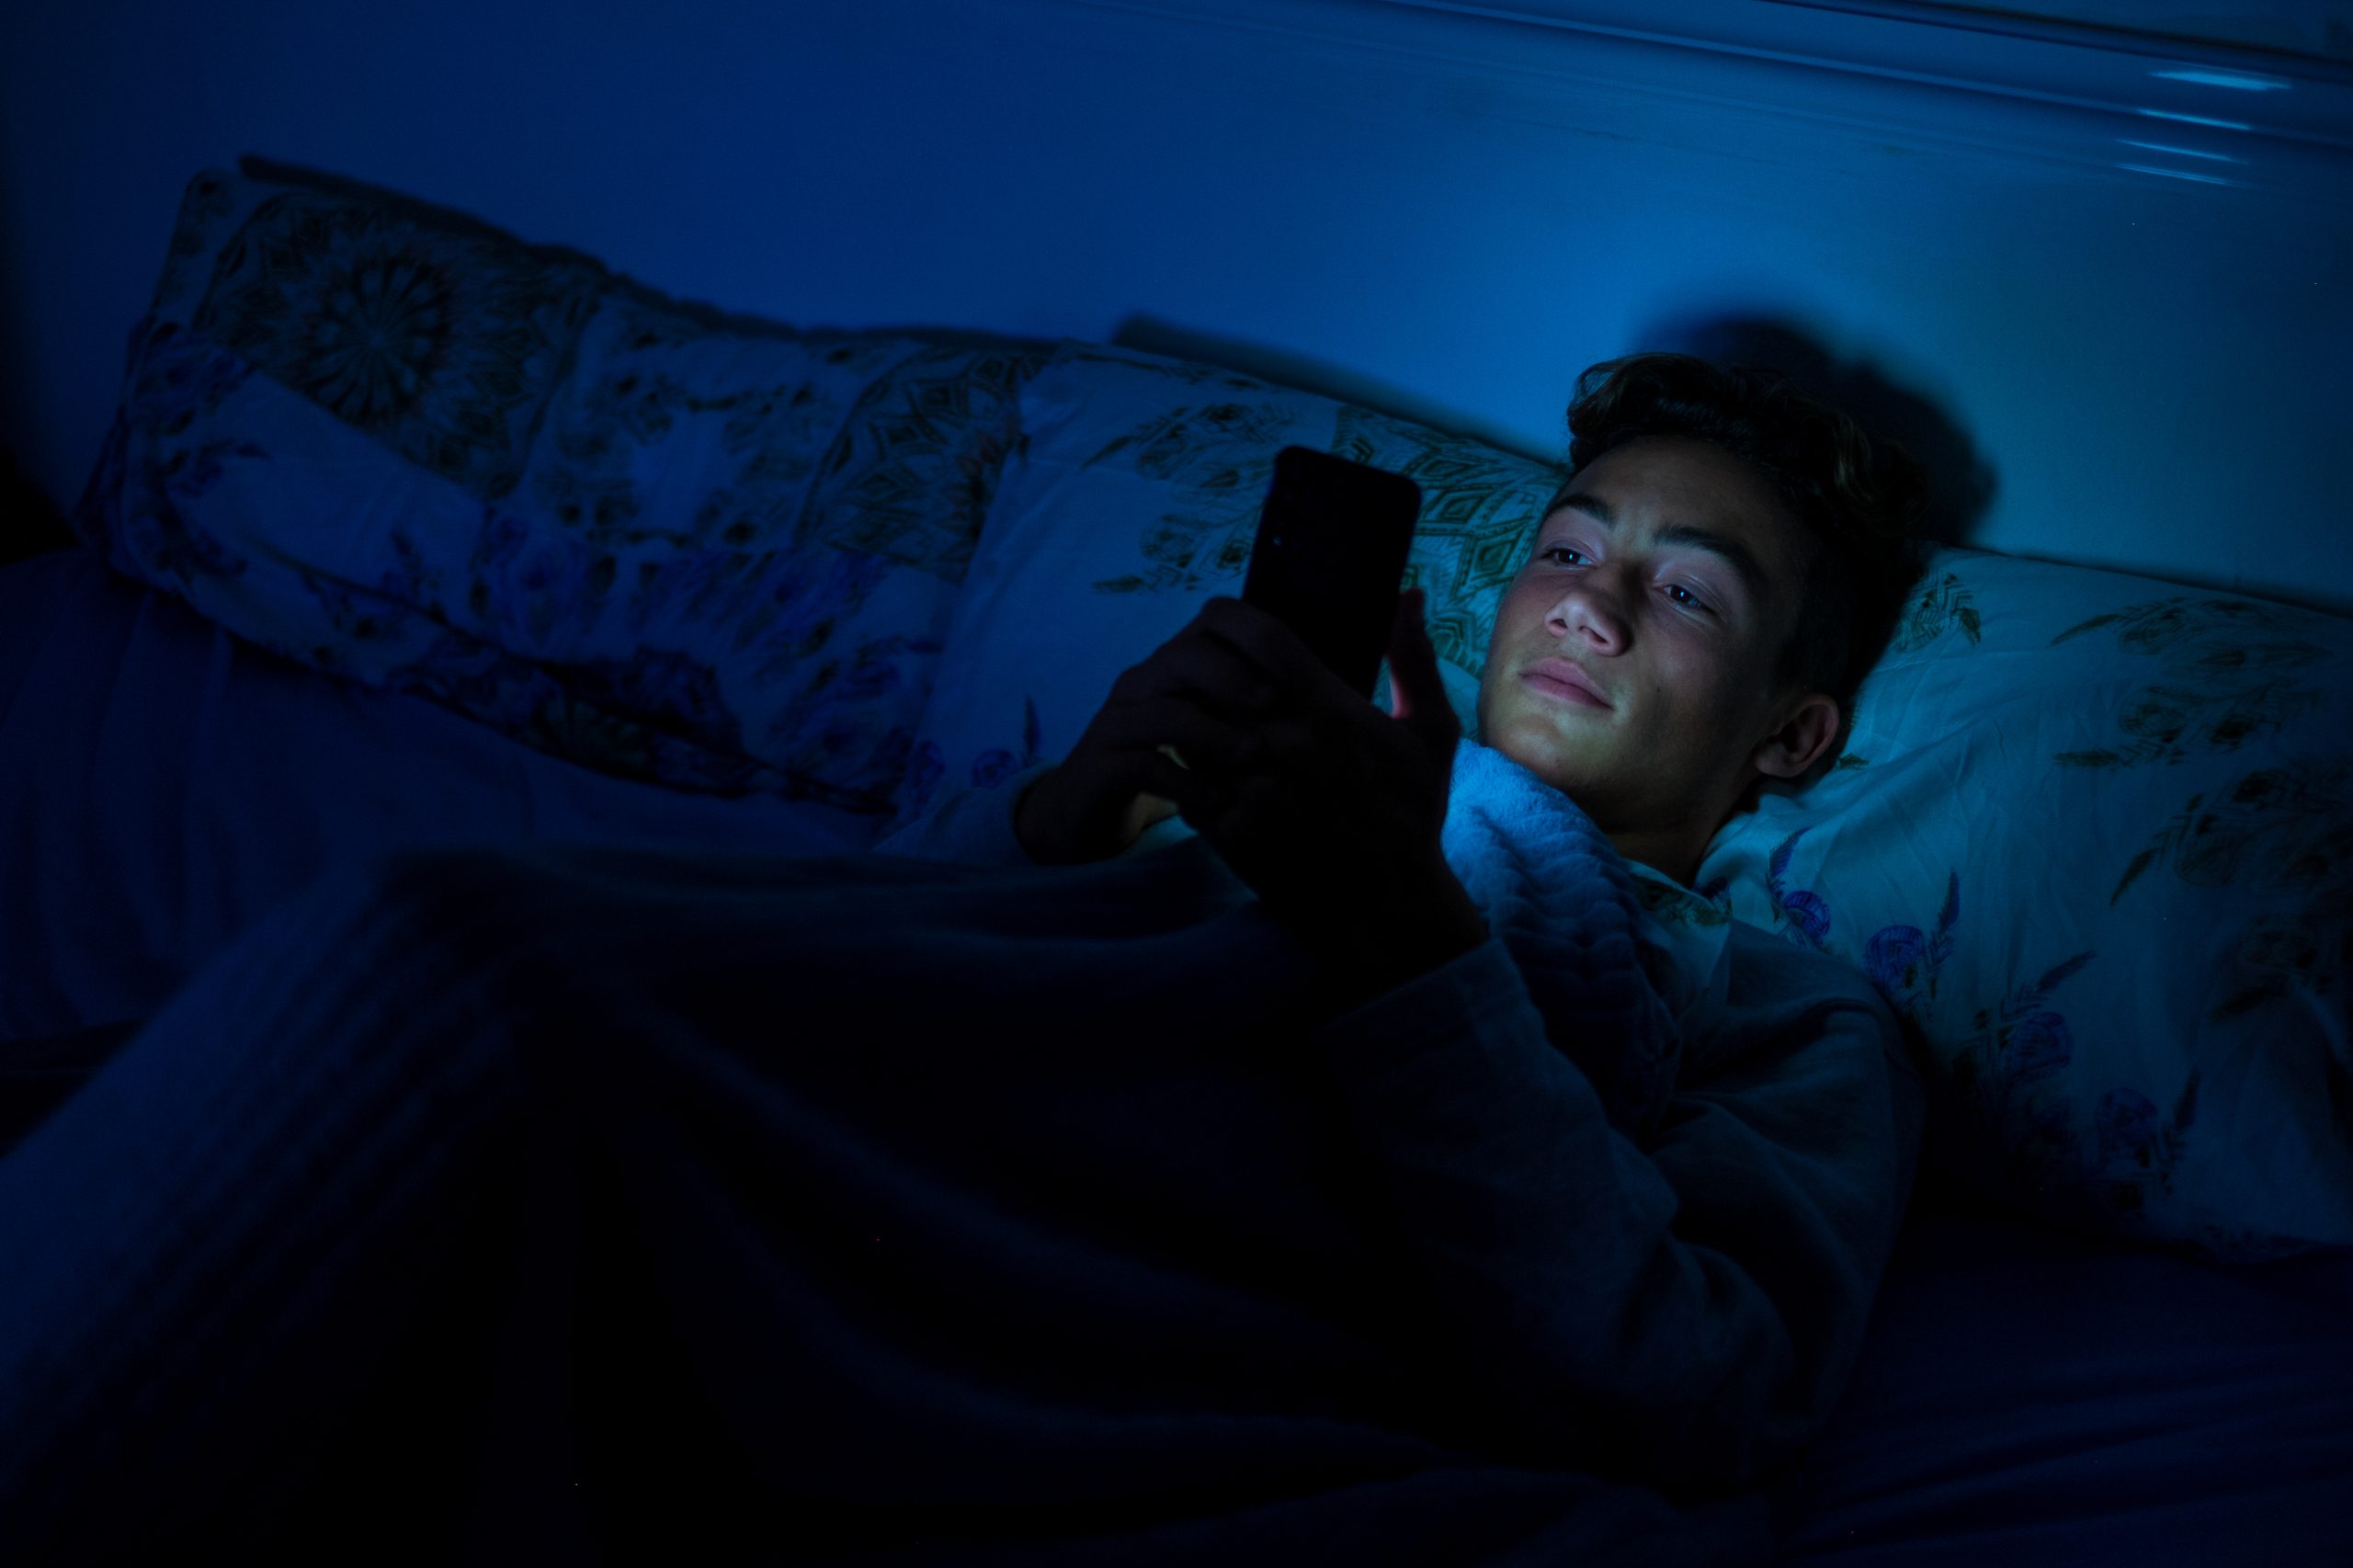 A teenage boy using his phone in bed before going to sleep.